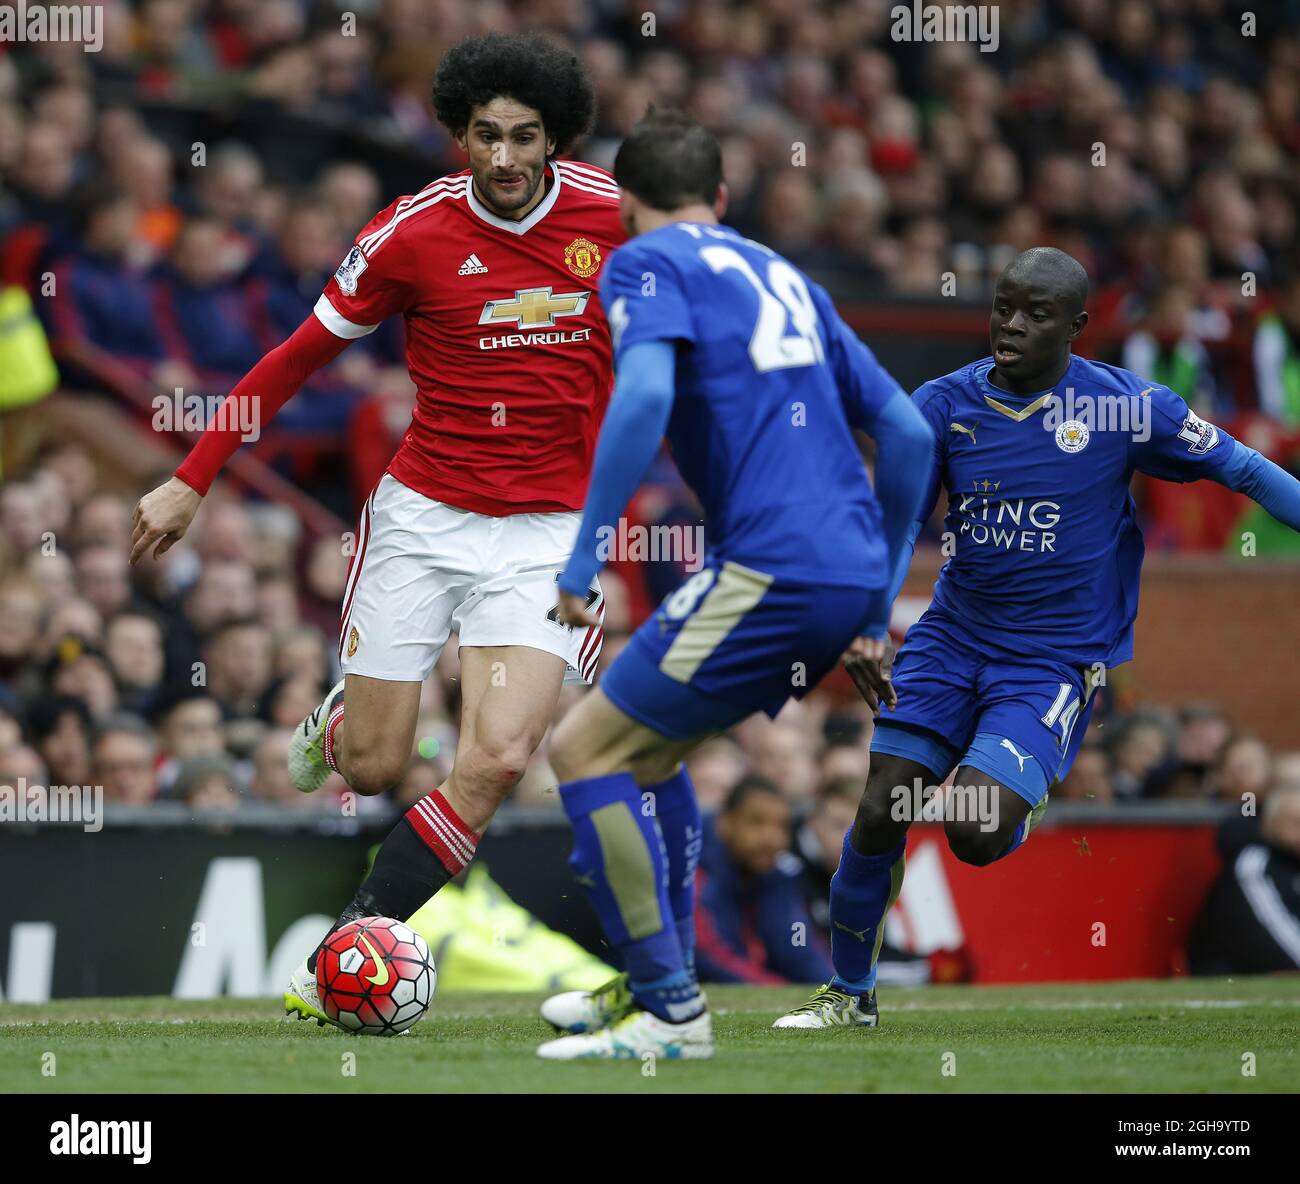 Mauroane Fellaini of Manchester United runs at Christian Fuchs of Leicester City during the Barclays Premier League match at the Old Trafford Stadium. Photo credit should read: Simon Bellis/Sportimage via PA Images                                - Newcastle Utd vs Tottenham - St James' Park Stadium - Newcastle Upon Tyne - England - 19th April 2015 - Picture Phil Oldham/Sportimage Stock Photo